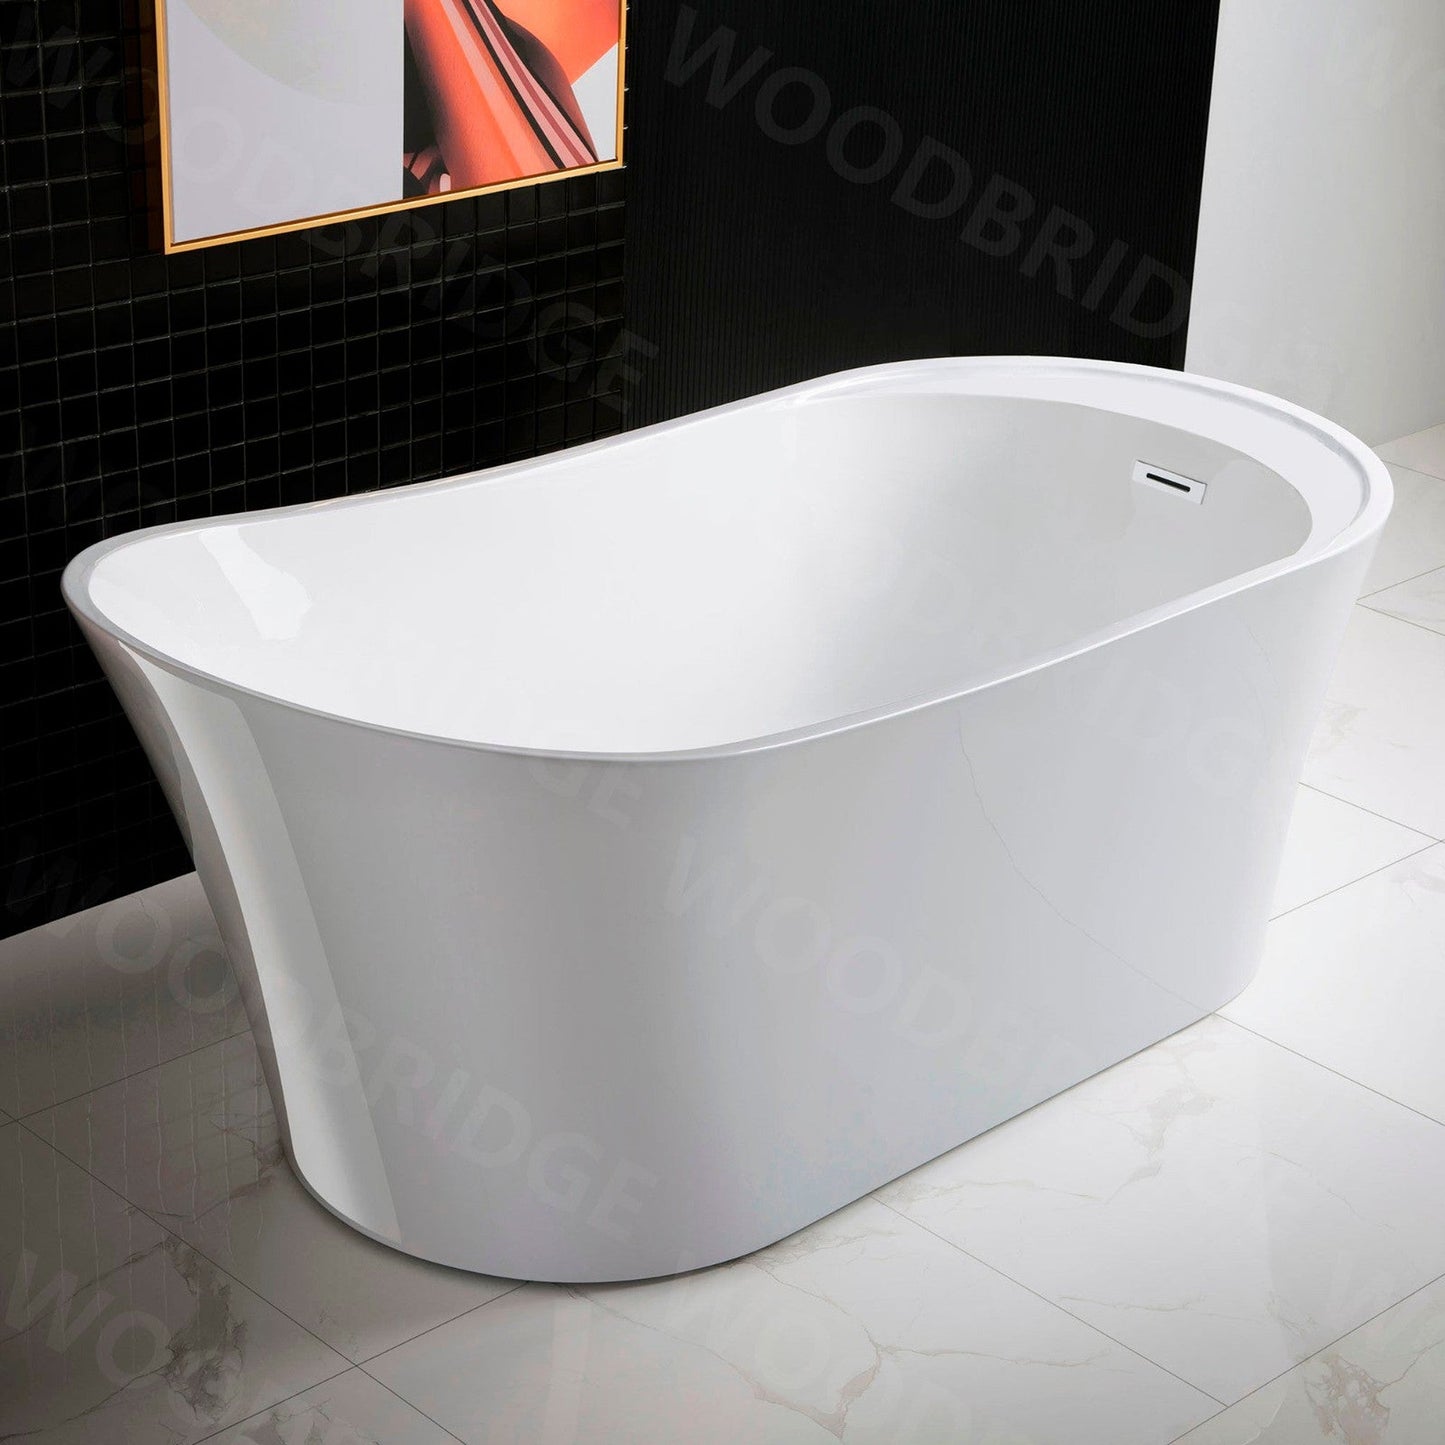 WoodBridge B0083 59" White Acrylic Freestanding Soaking Bathtub With Brushed Gold Drain, Overflow, F0073BGVT Tub Filler and Caddy Tray